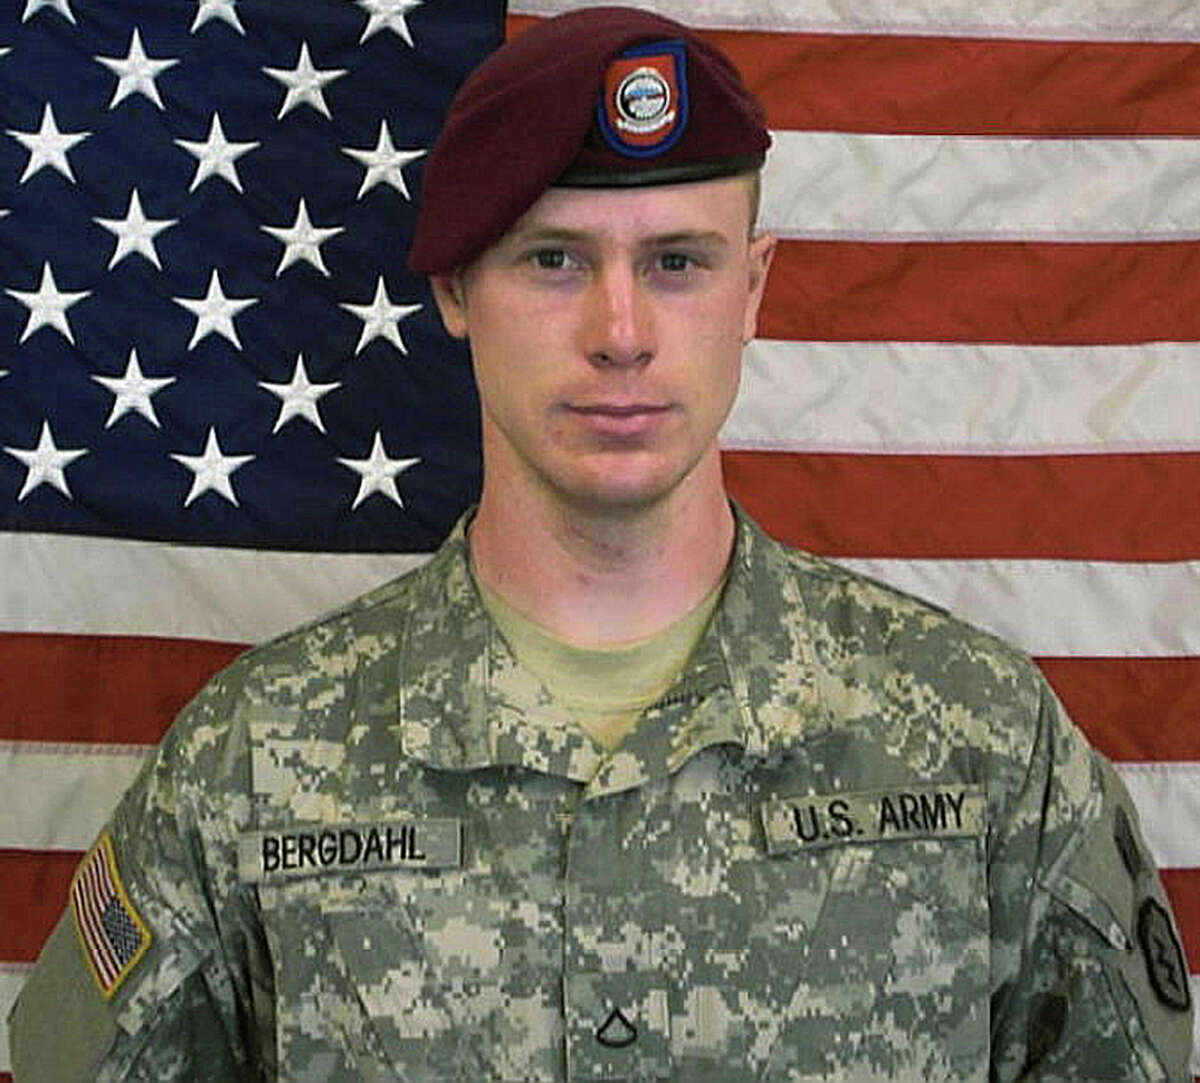 "Serial" (2014- )What it's about: Season 2 of this podcast follows U.S. Army Sgt. Bowe Bergdahl, the soldier held prisoner for years by the Taliban after leaving his post in Afghanistan. The program won a Peabody Award in April 2015.